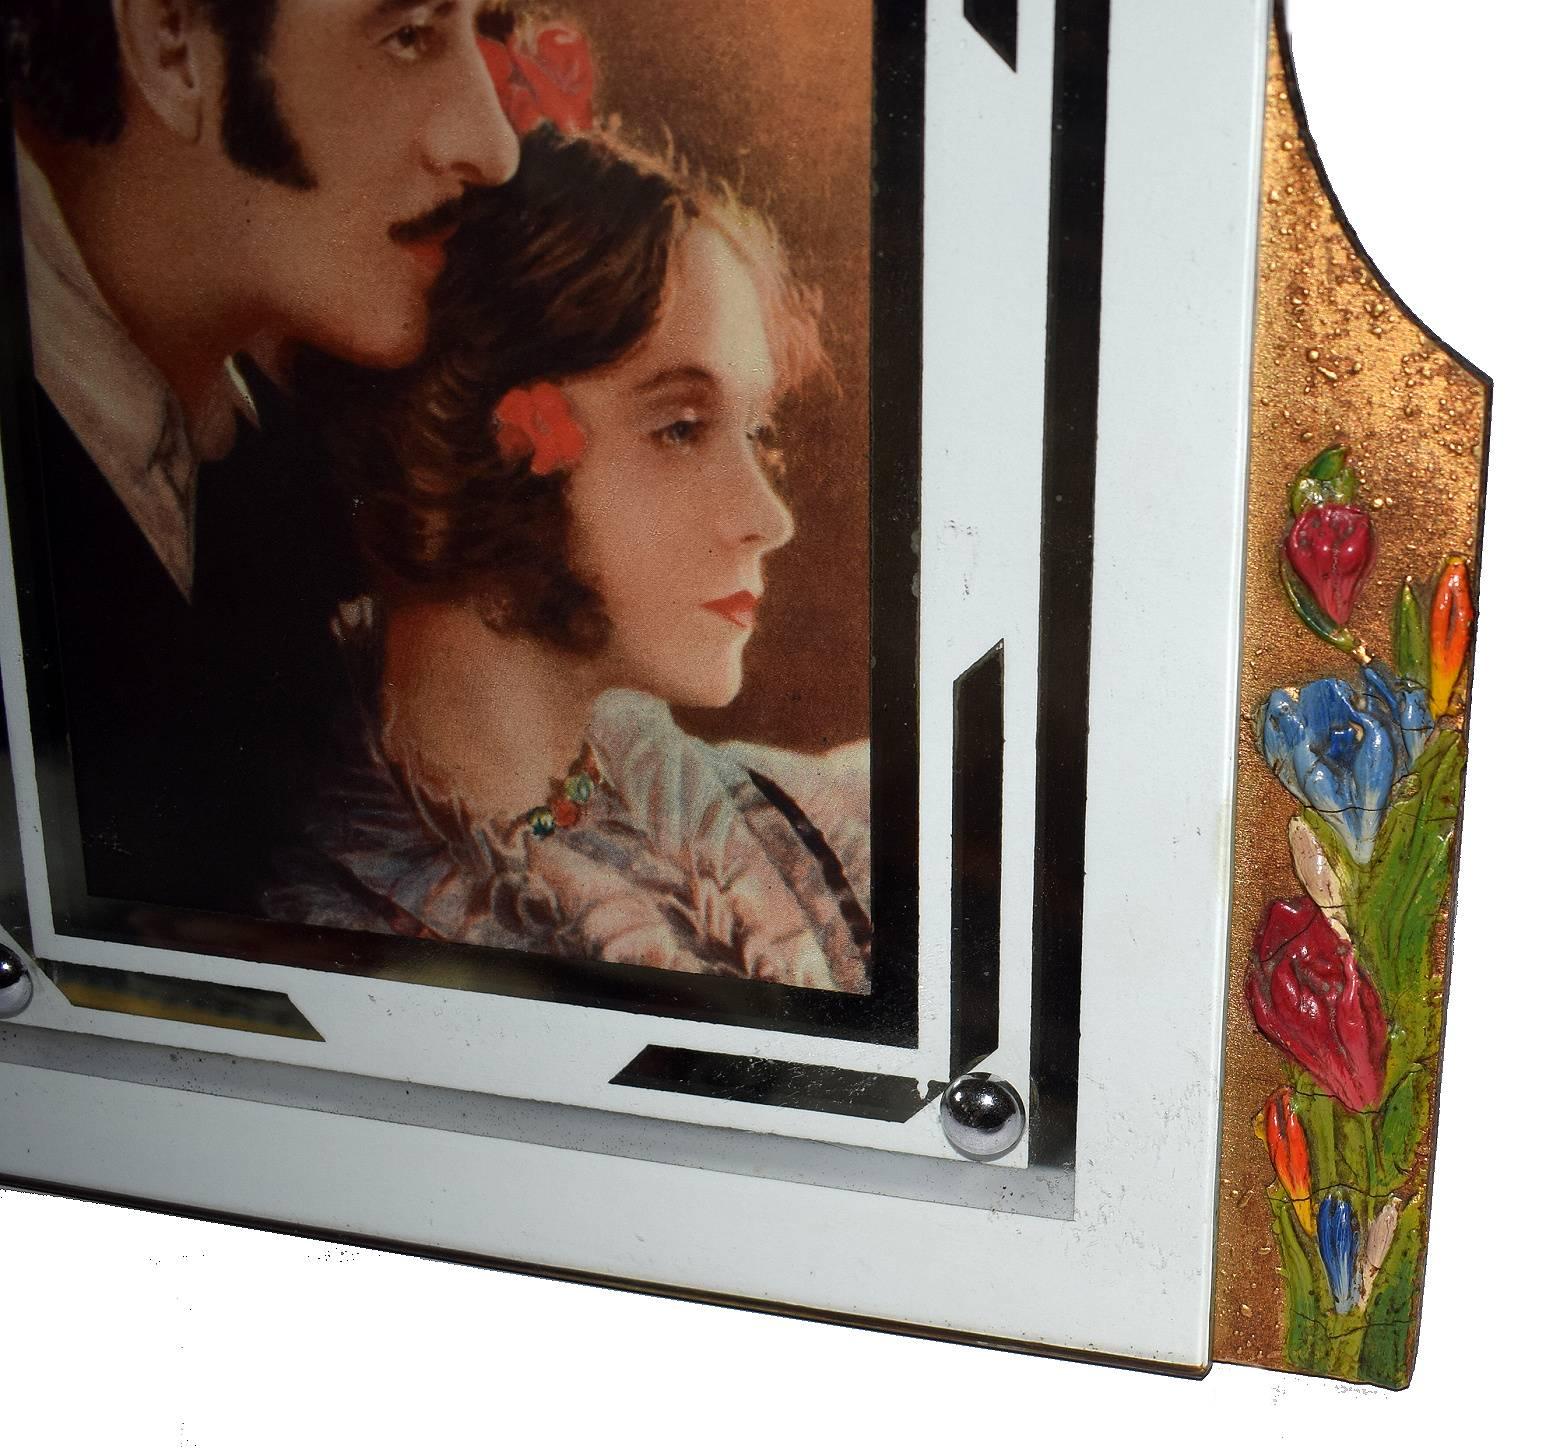 This delightful Art Deco Barbola picture frame features traditional vintage style floral motifs which are further enhanced by the natural colour palette. The central glass frame has a mirrored geometric motif design. Original gilded backing which